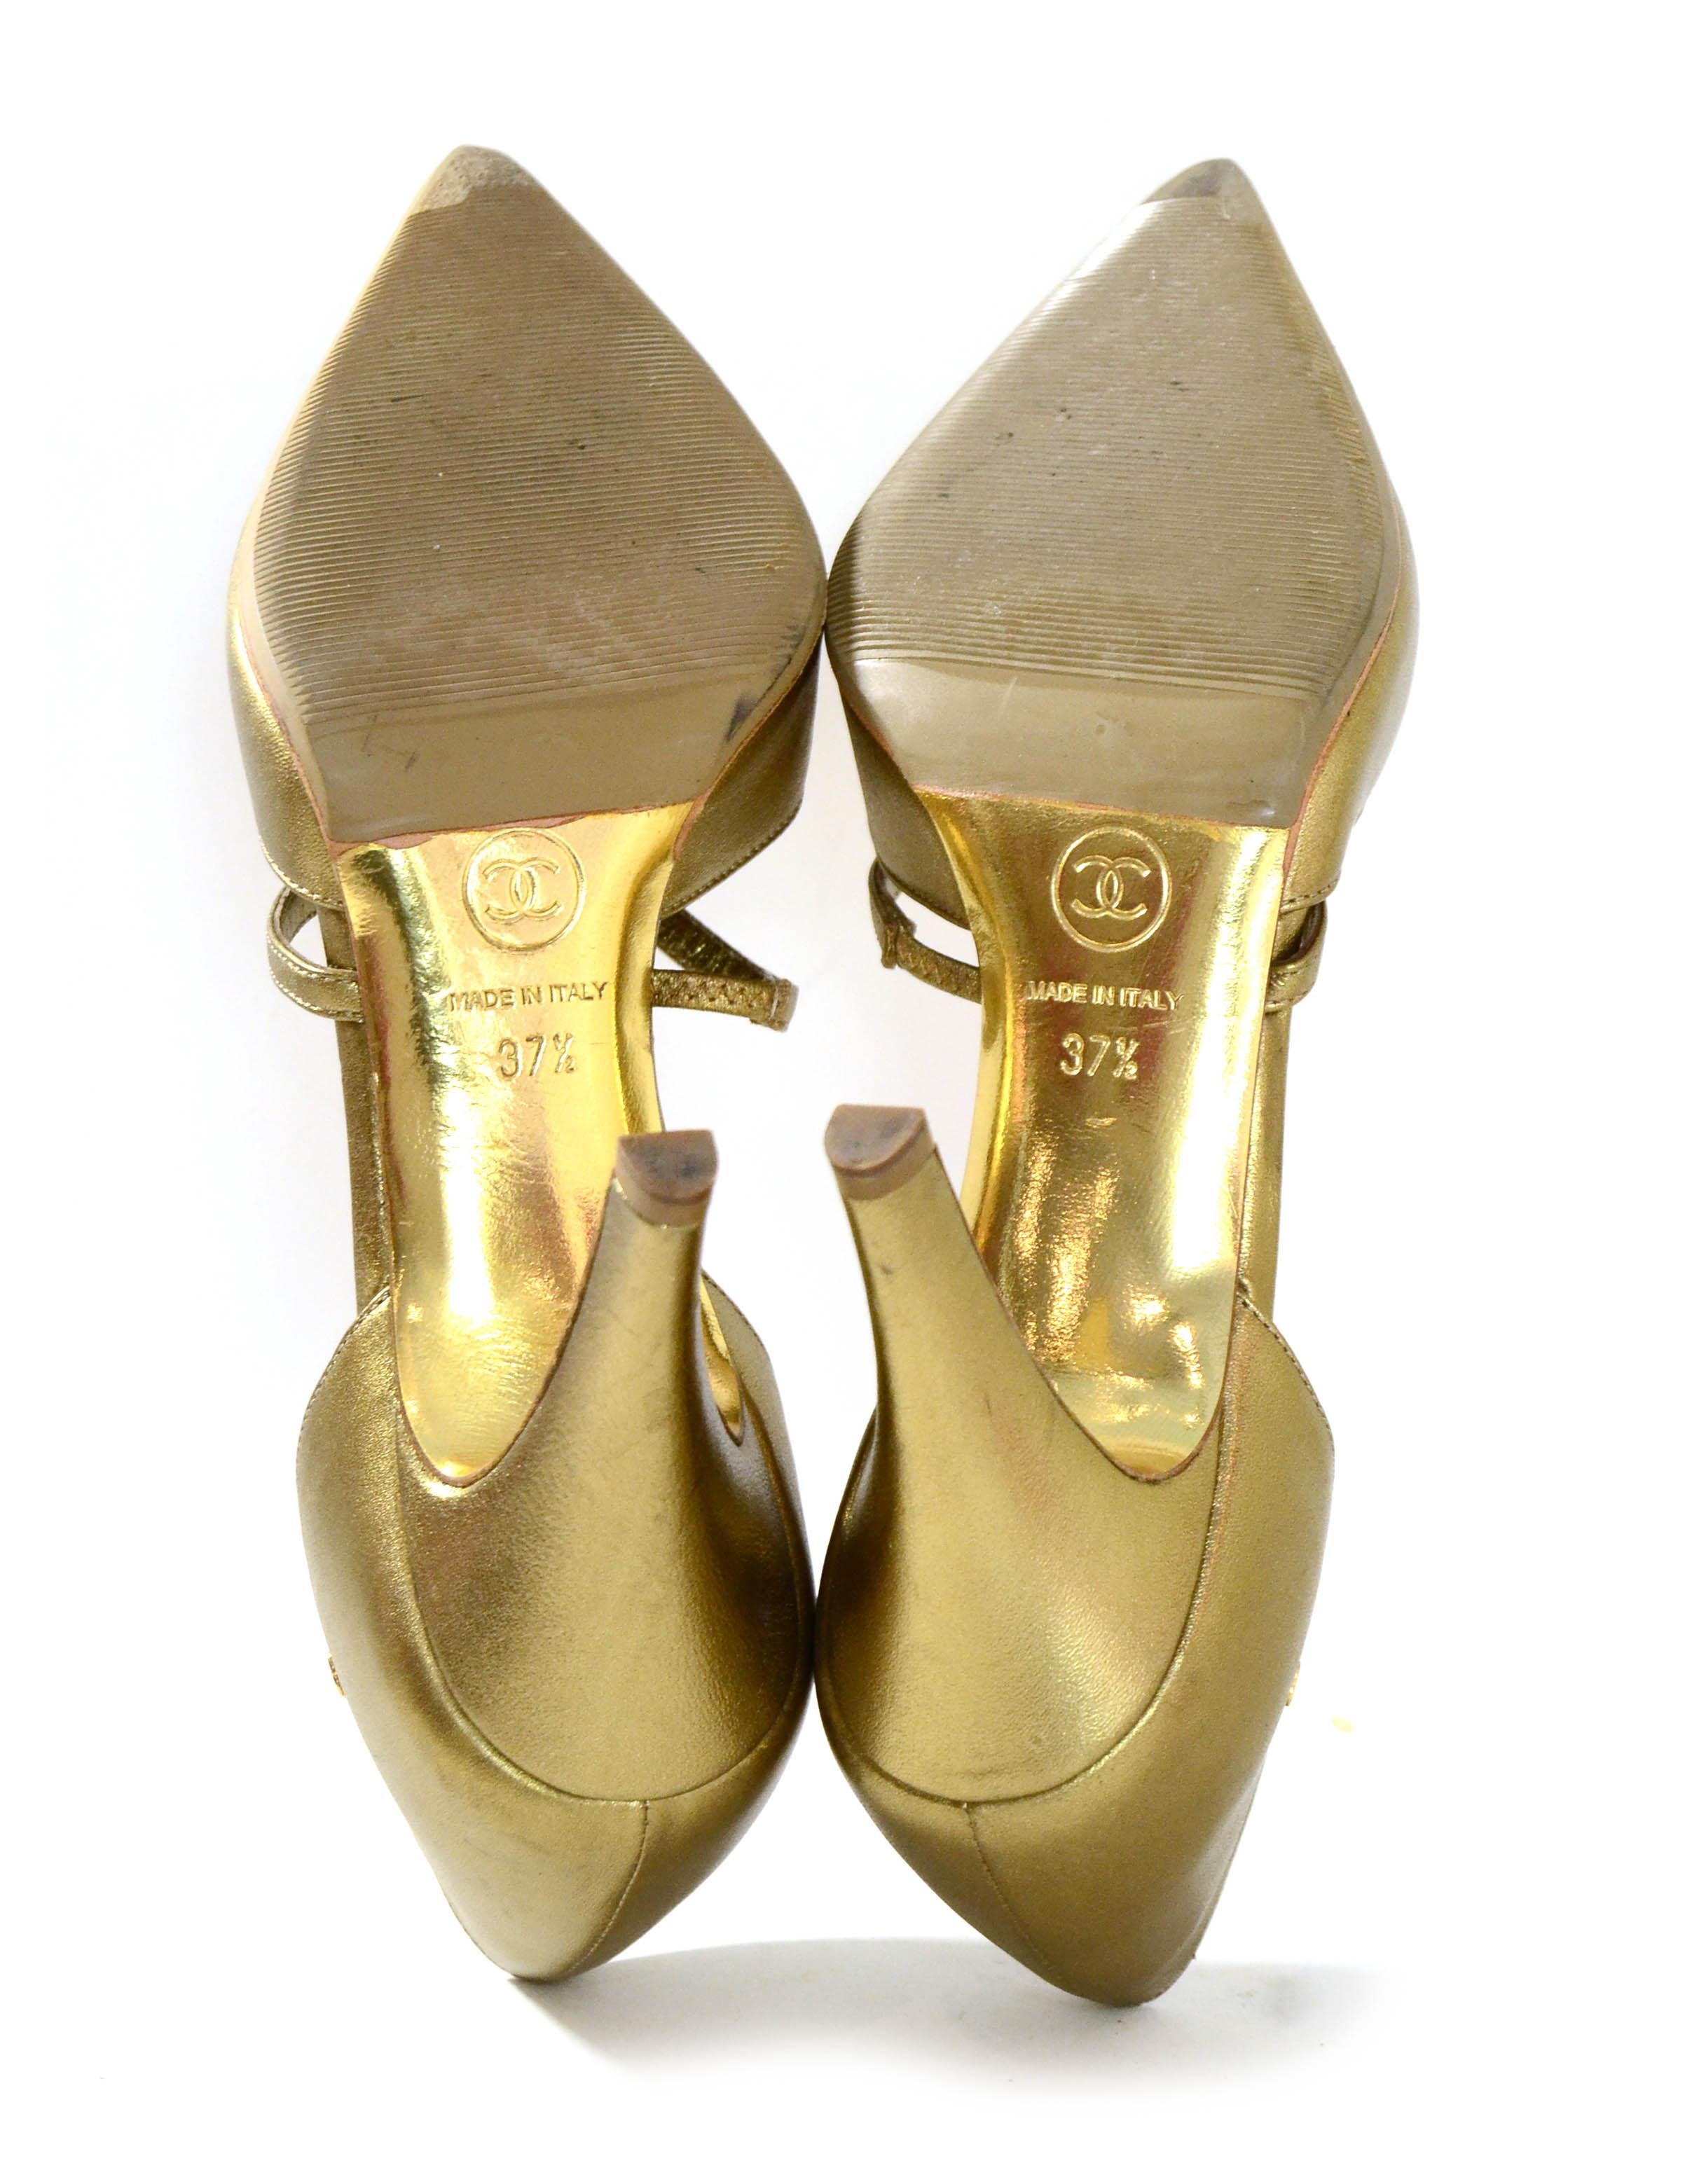 Women's Chanel Gold Leather Pointy Toe Pumps sz 37.5